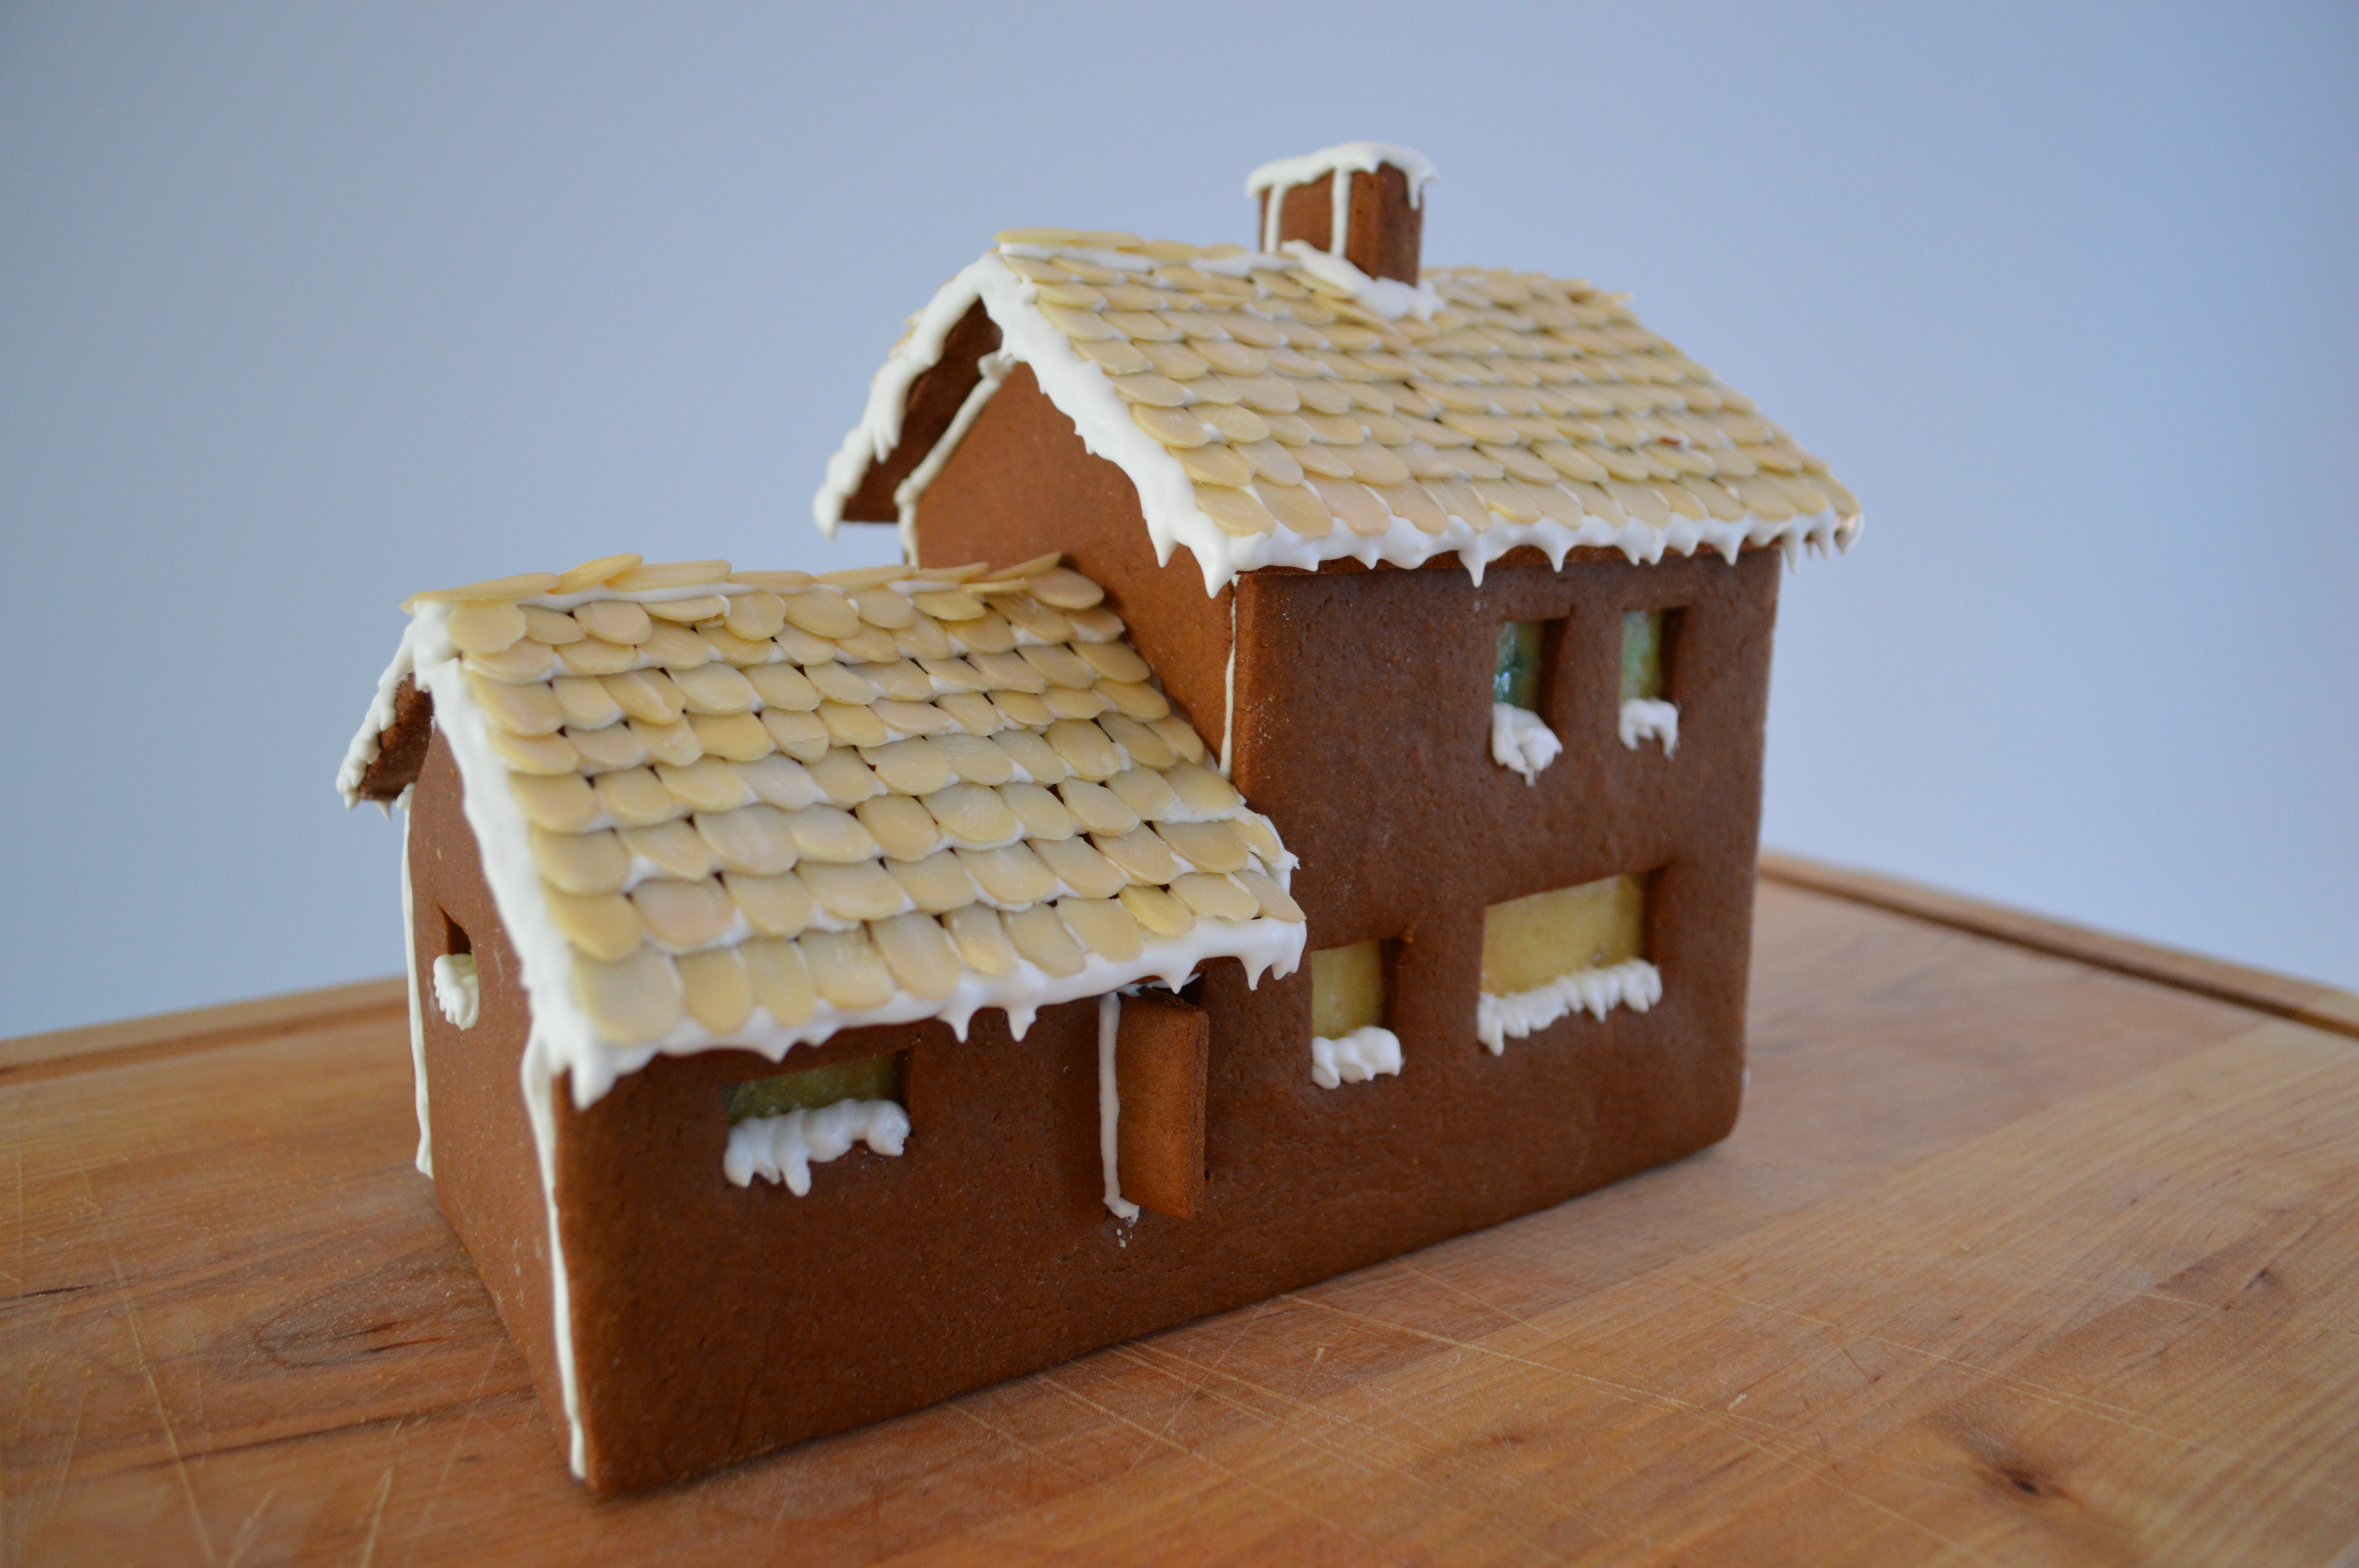 A gingerbread house, modeled after the house I live in